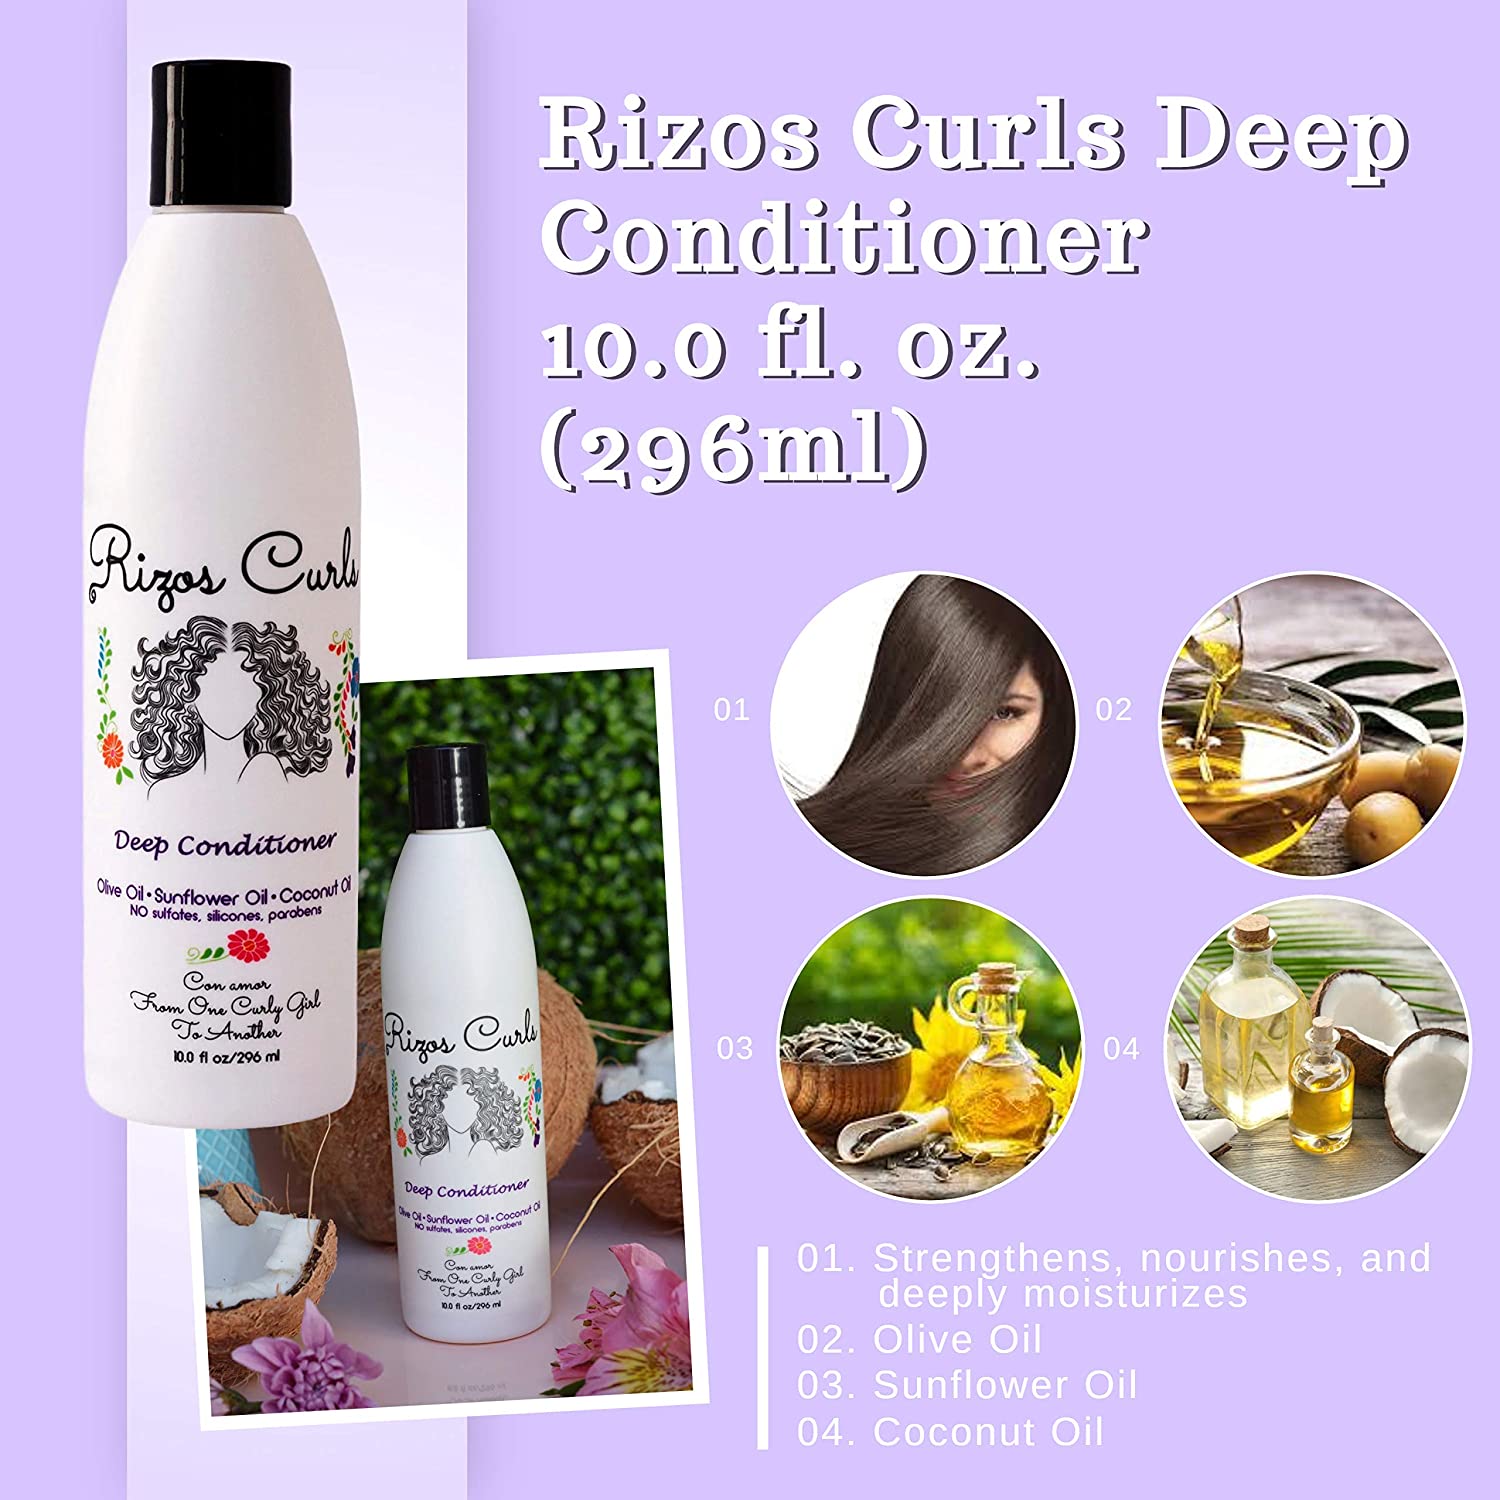 Rizos Curls Hydrating Shampoo, Deep Conditioner & Curl Defining Cream for Curly Hair Products - Intense Treatment & Nourishment for Wavy and Curly Hair (Hair Care Set) - image 2 of 7